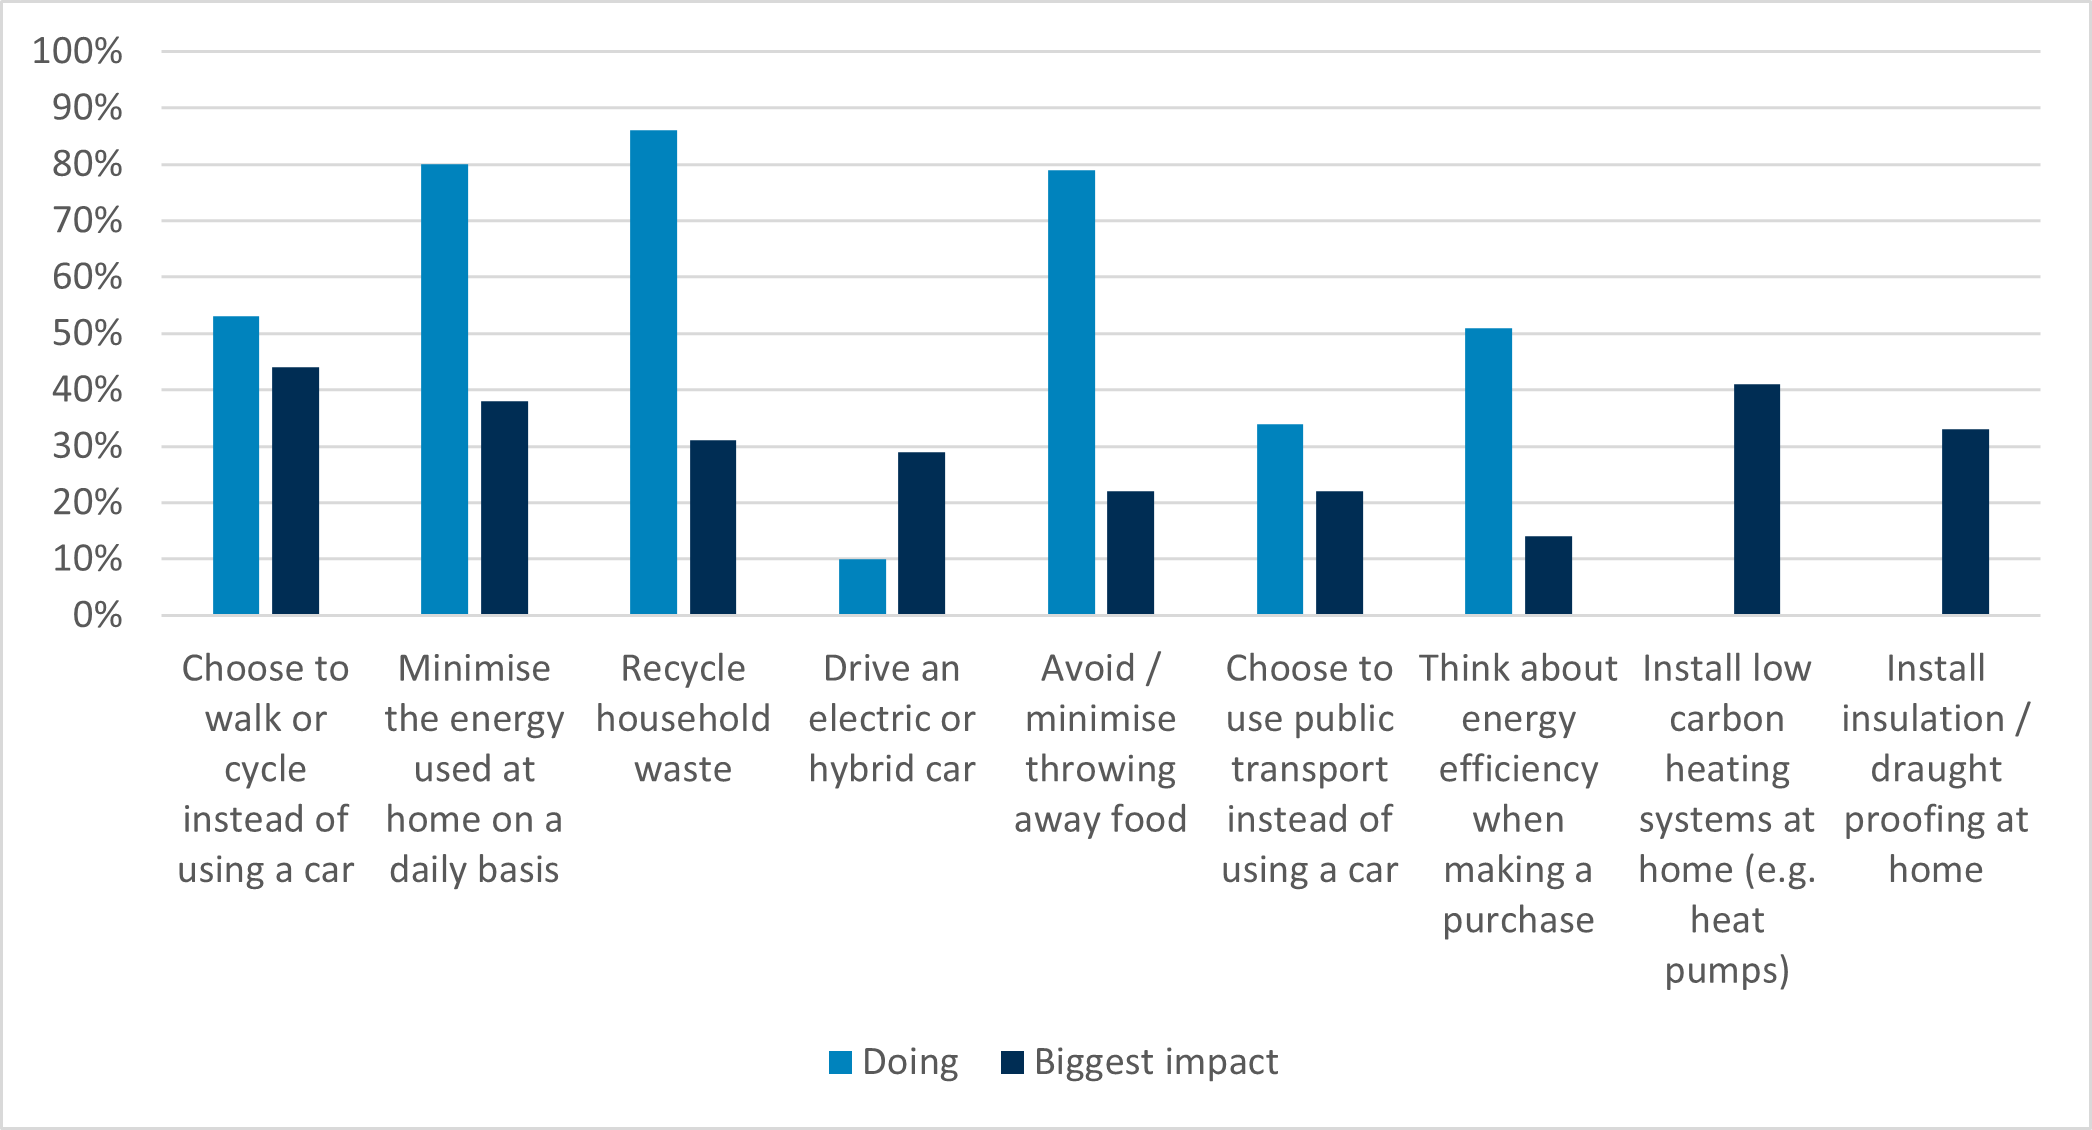 A comparison between the percentage of consumers engaged in an activity related to reaching net zero targets and the impact of that activity.